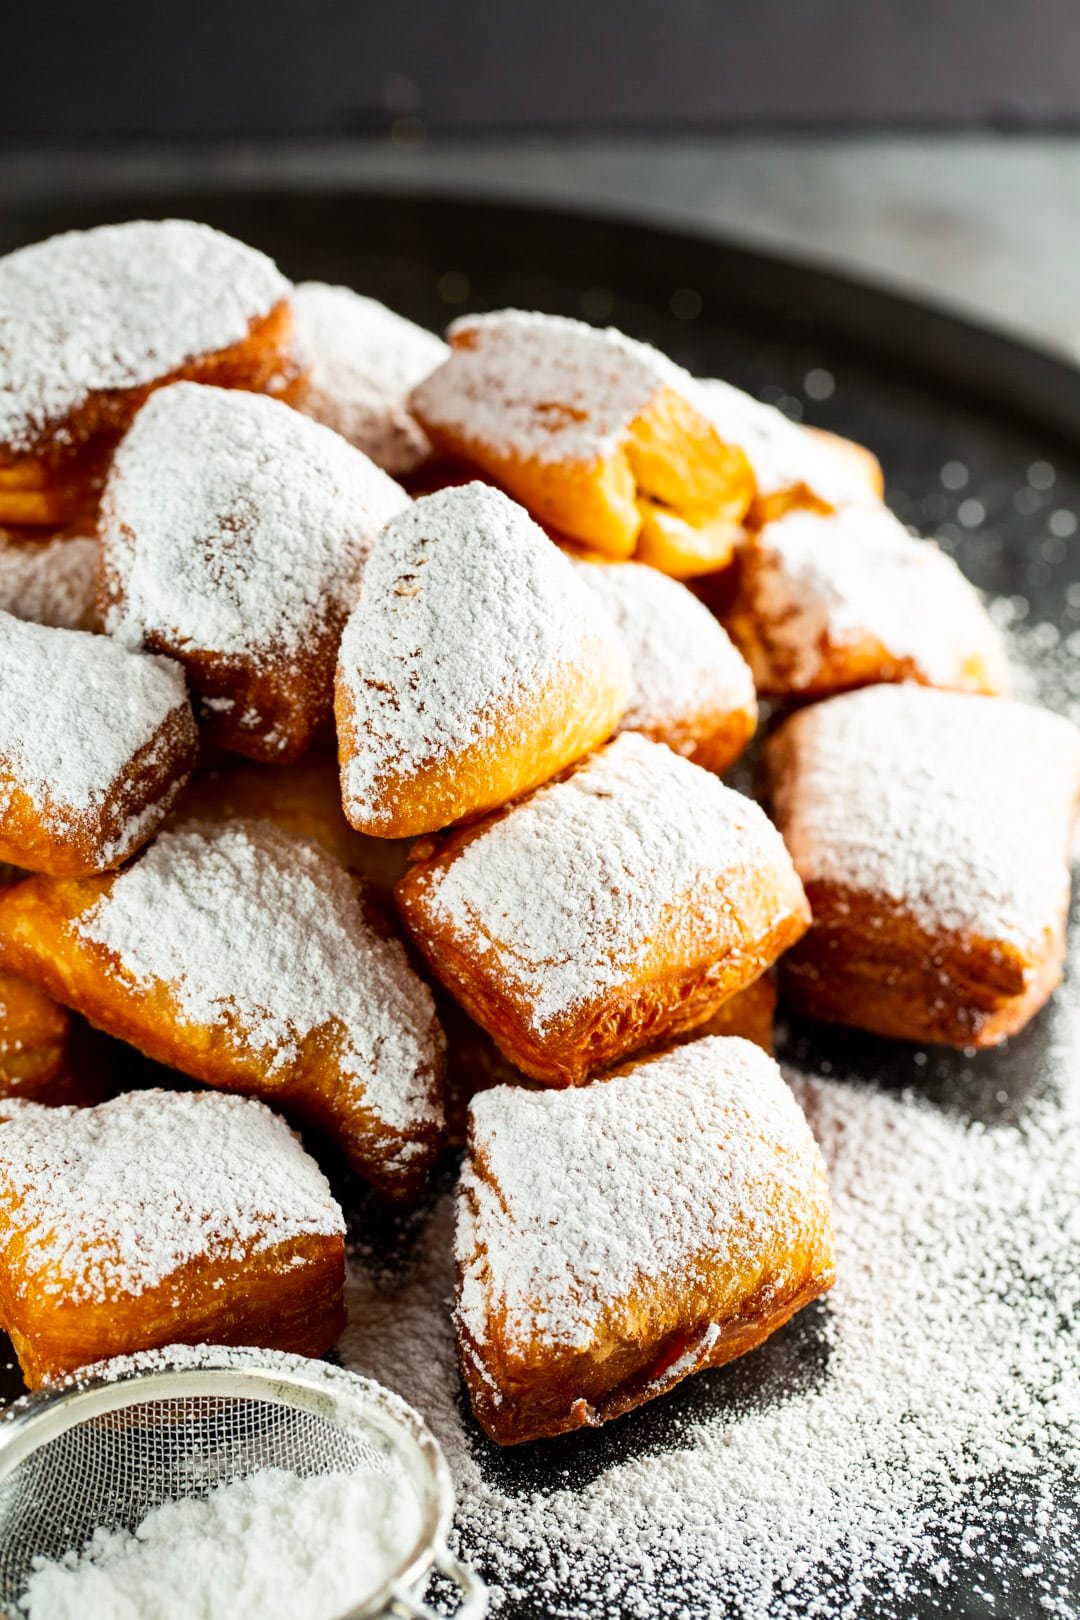 Beignets piled up on a serving tray.